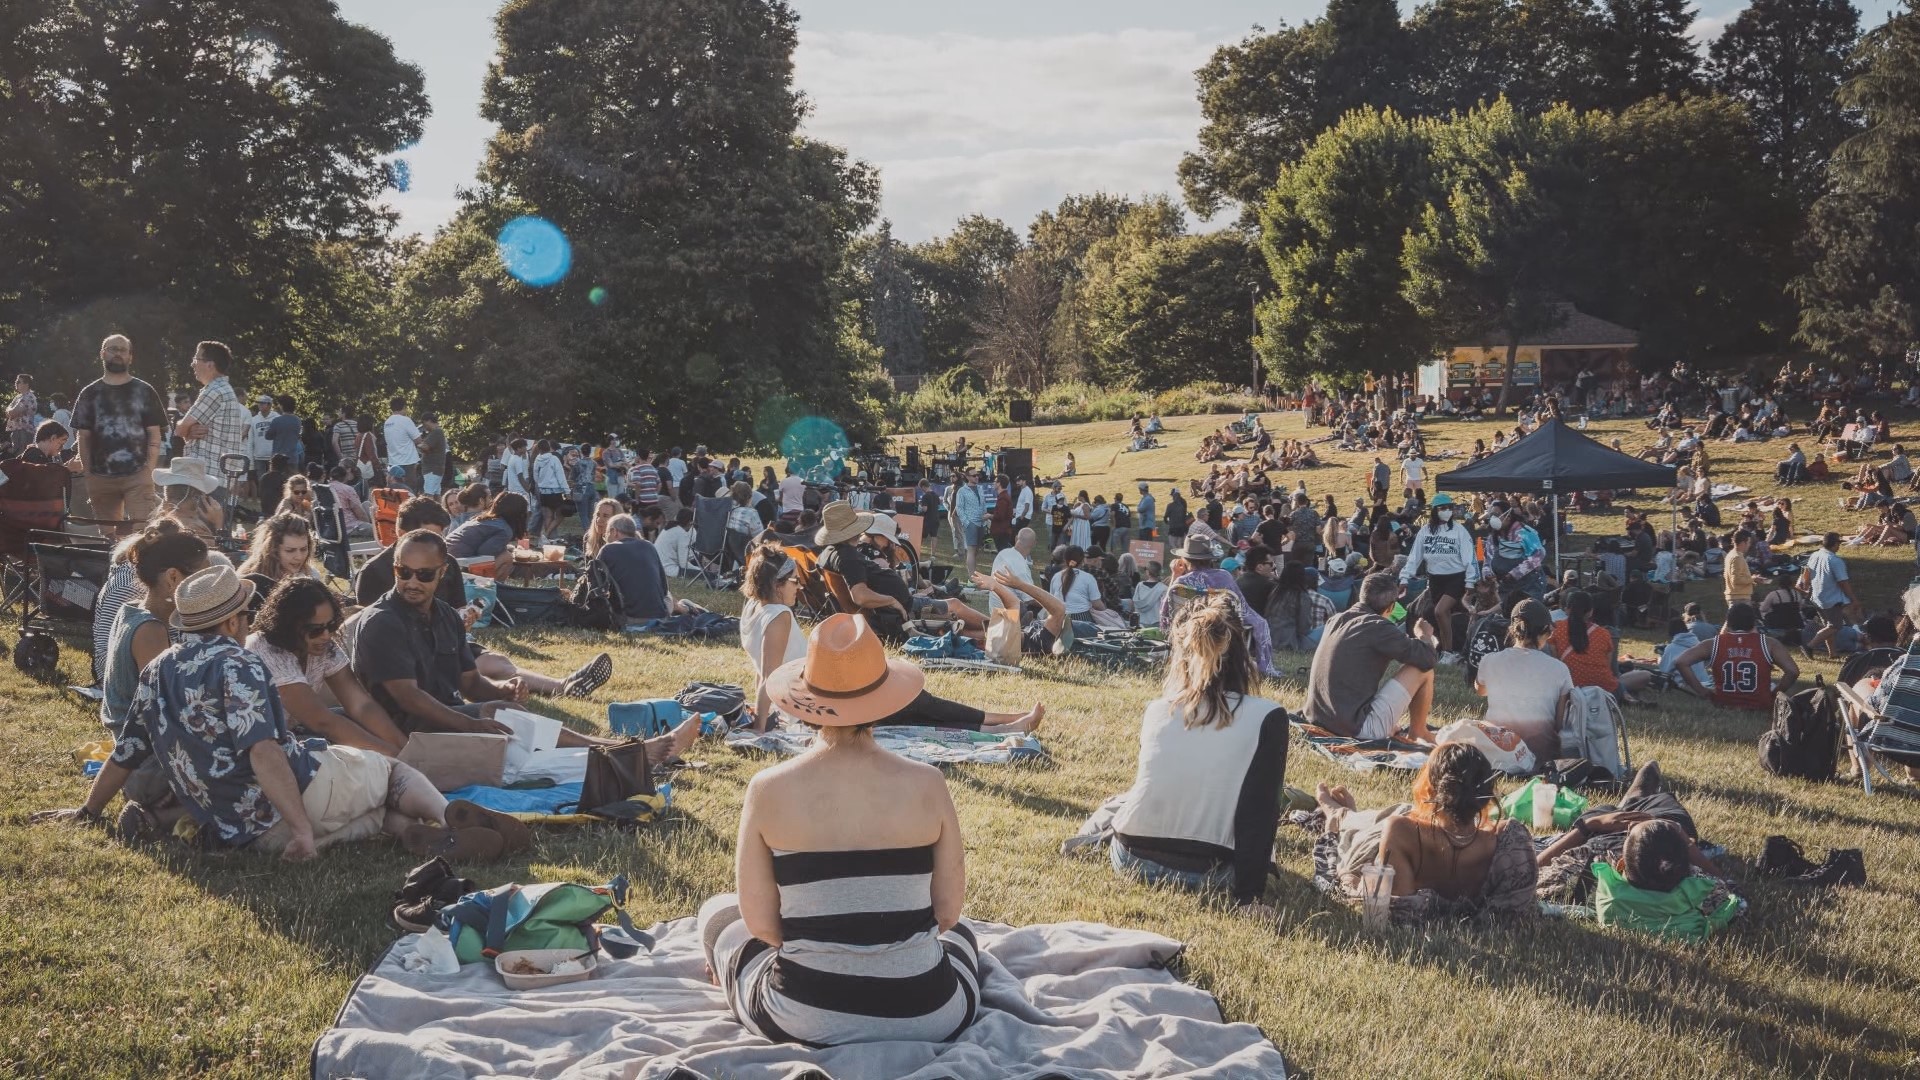 The Tiger Tiger Festival will include food, music poetry and interactive art. The festival will be held on July 22 at Fernhill Park in Northeast Portland.